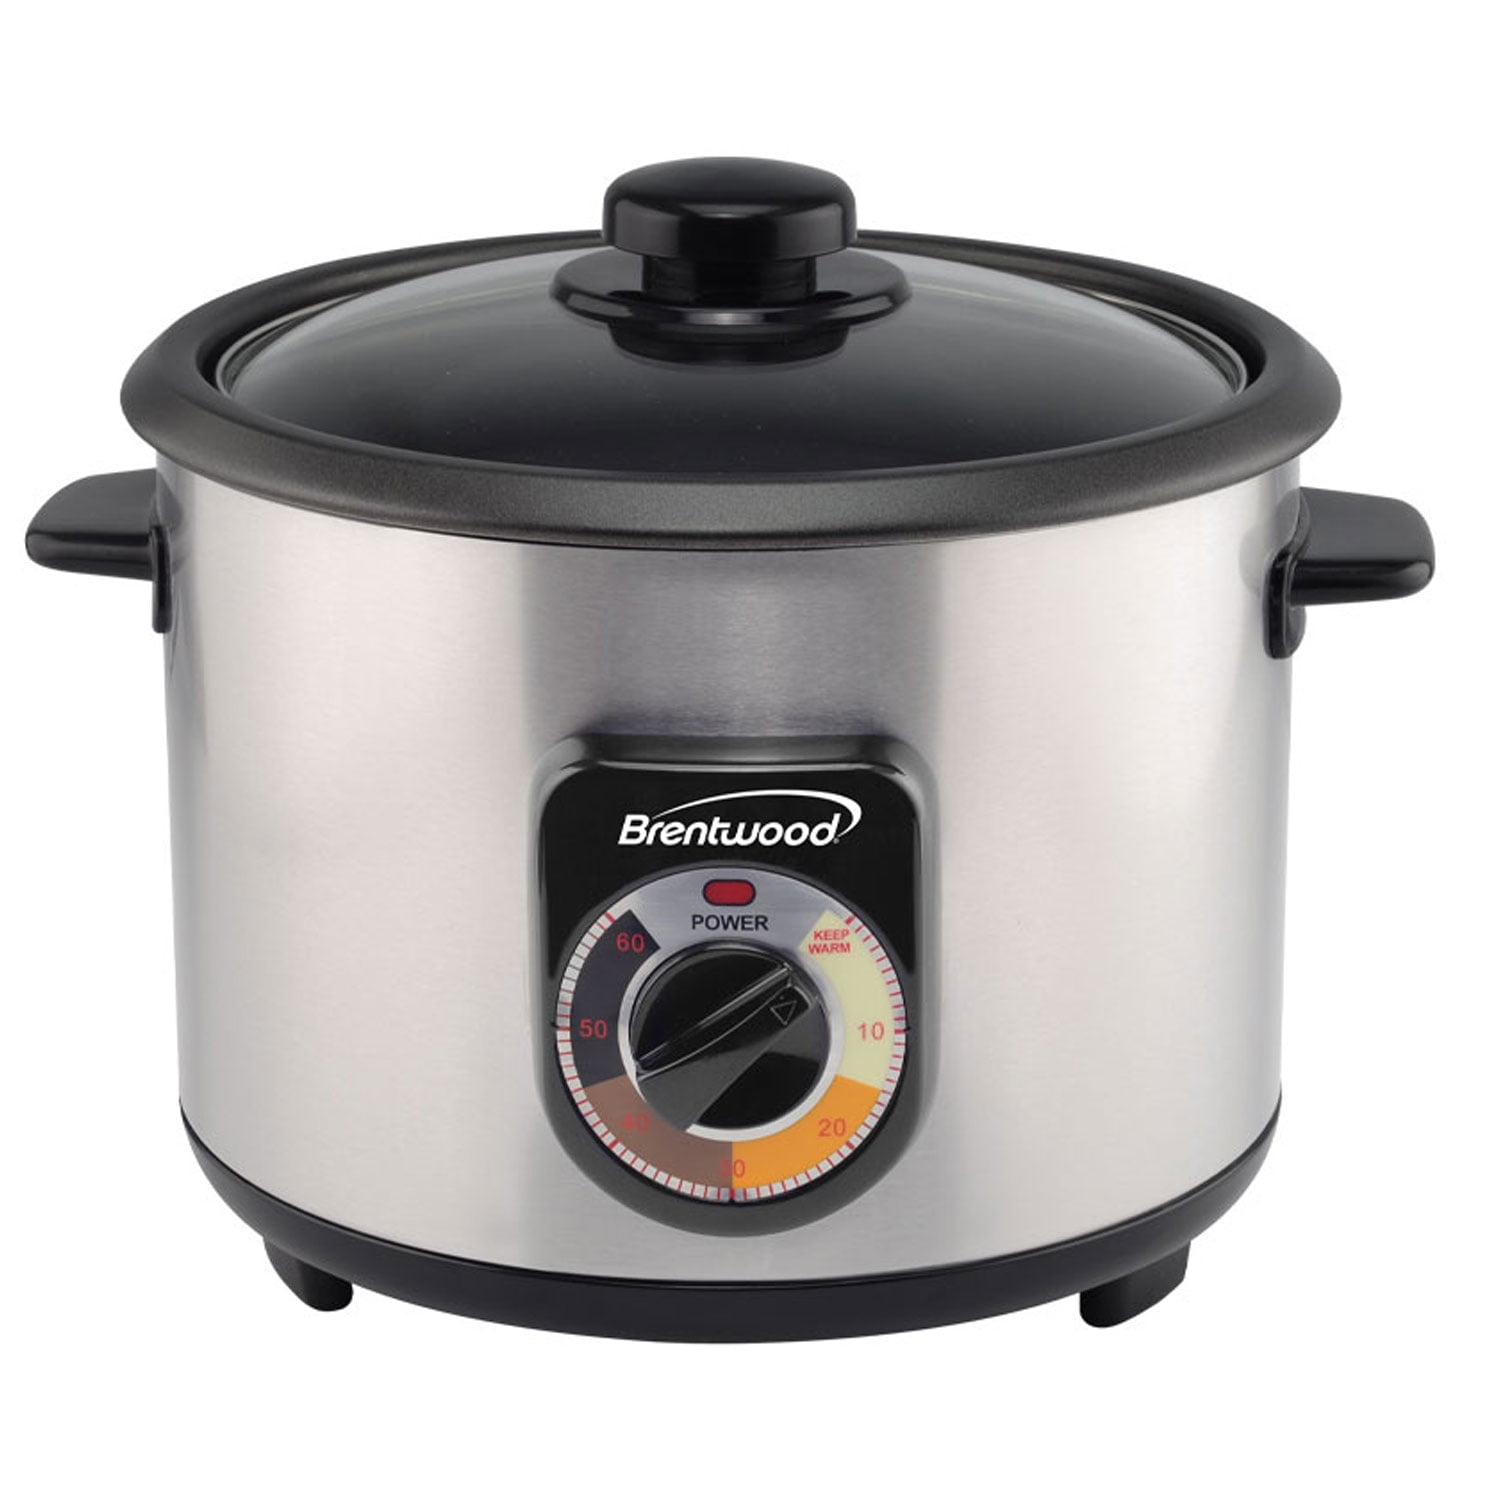 Brentwood TS-1210S Stainless Steel Crunchy Persian Rice Cooker ...